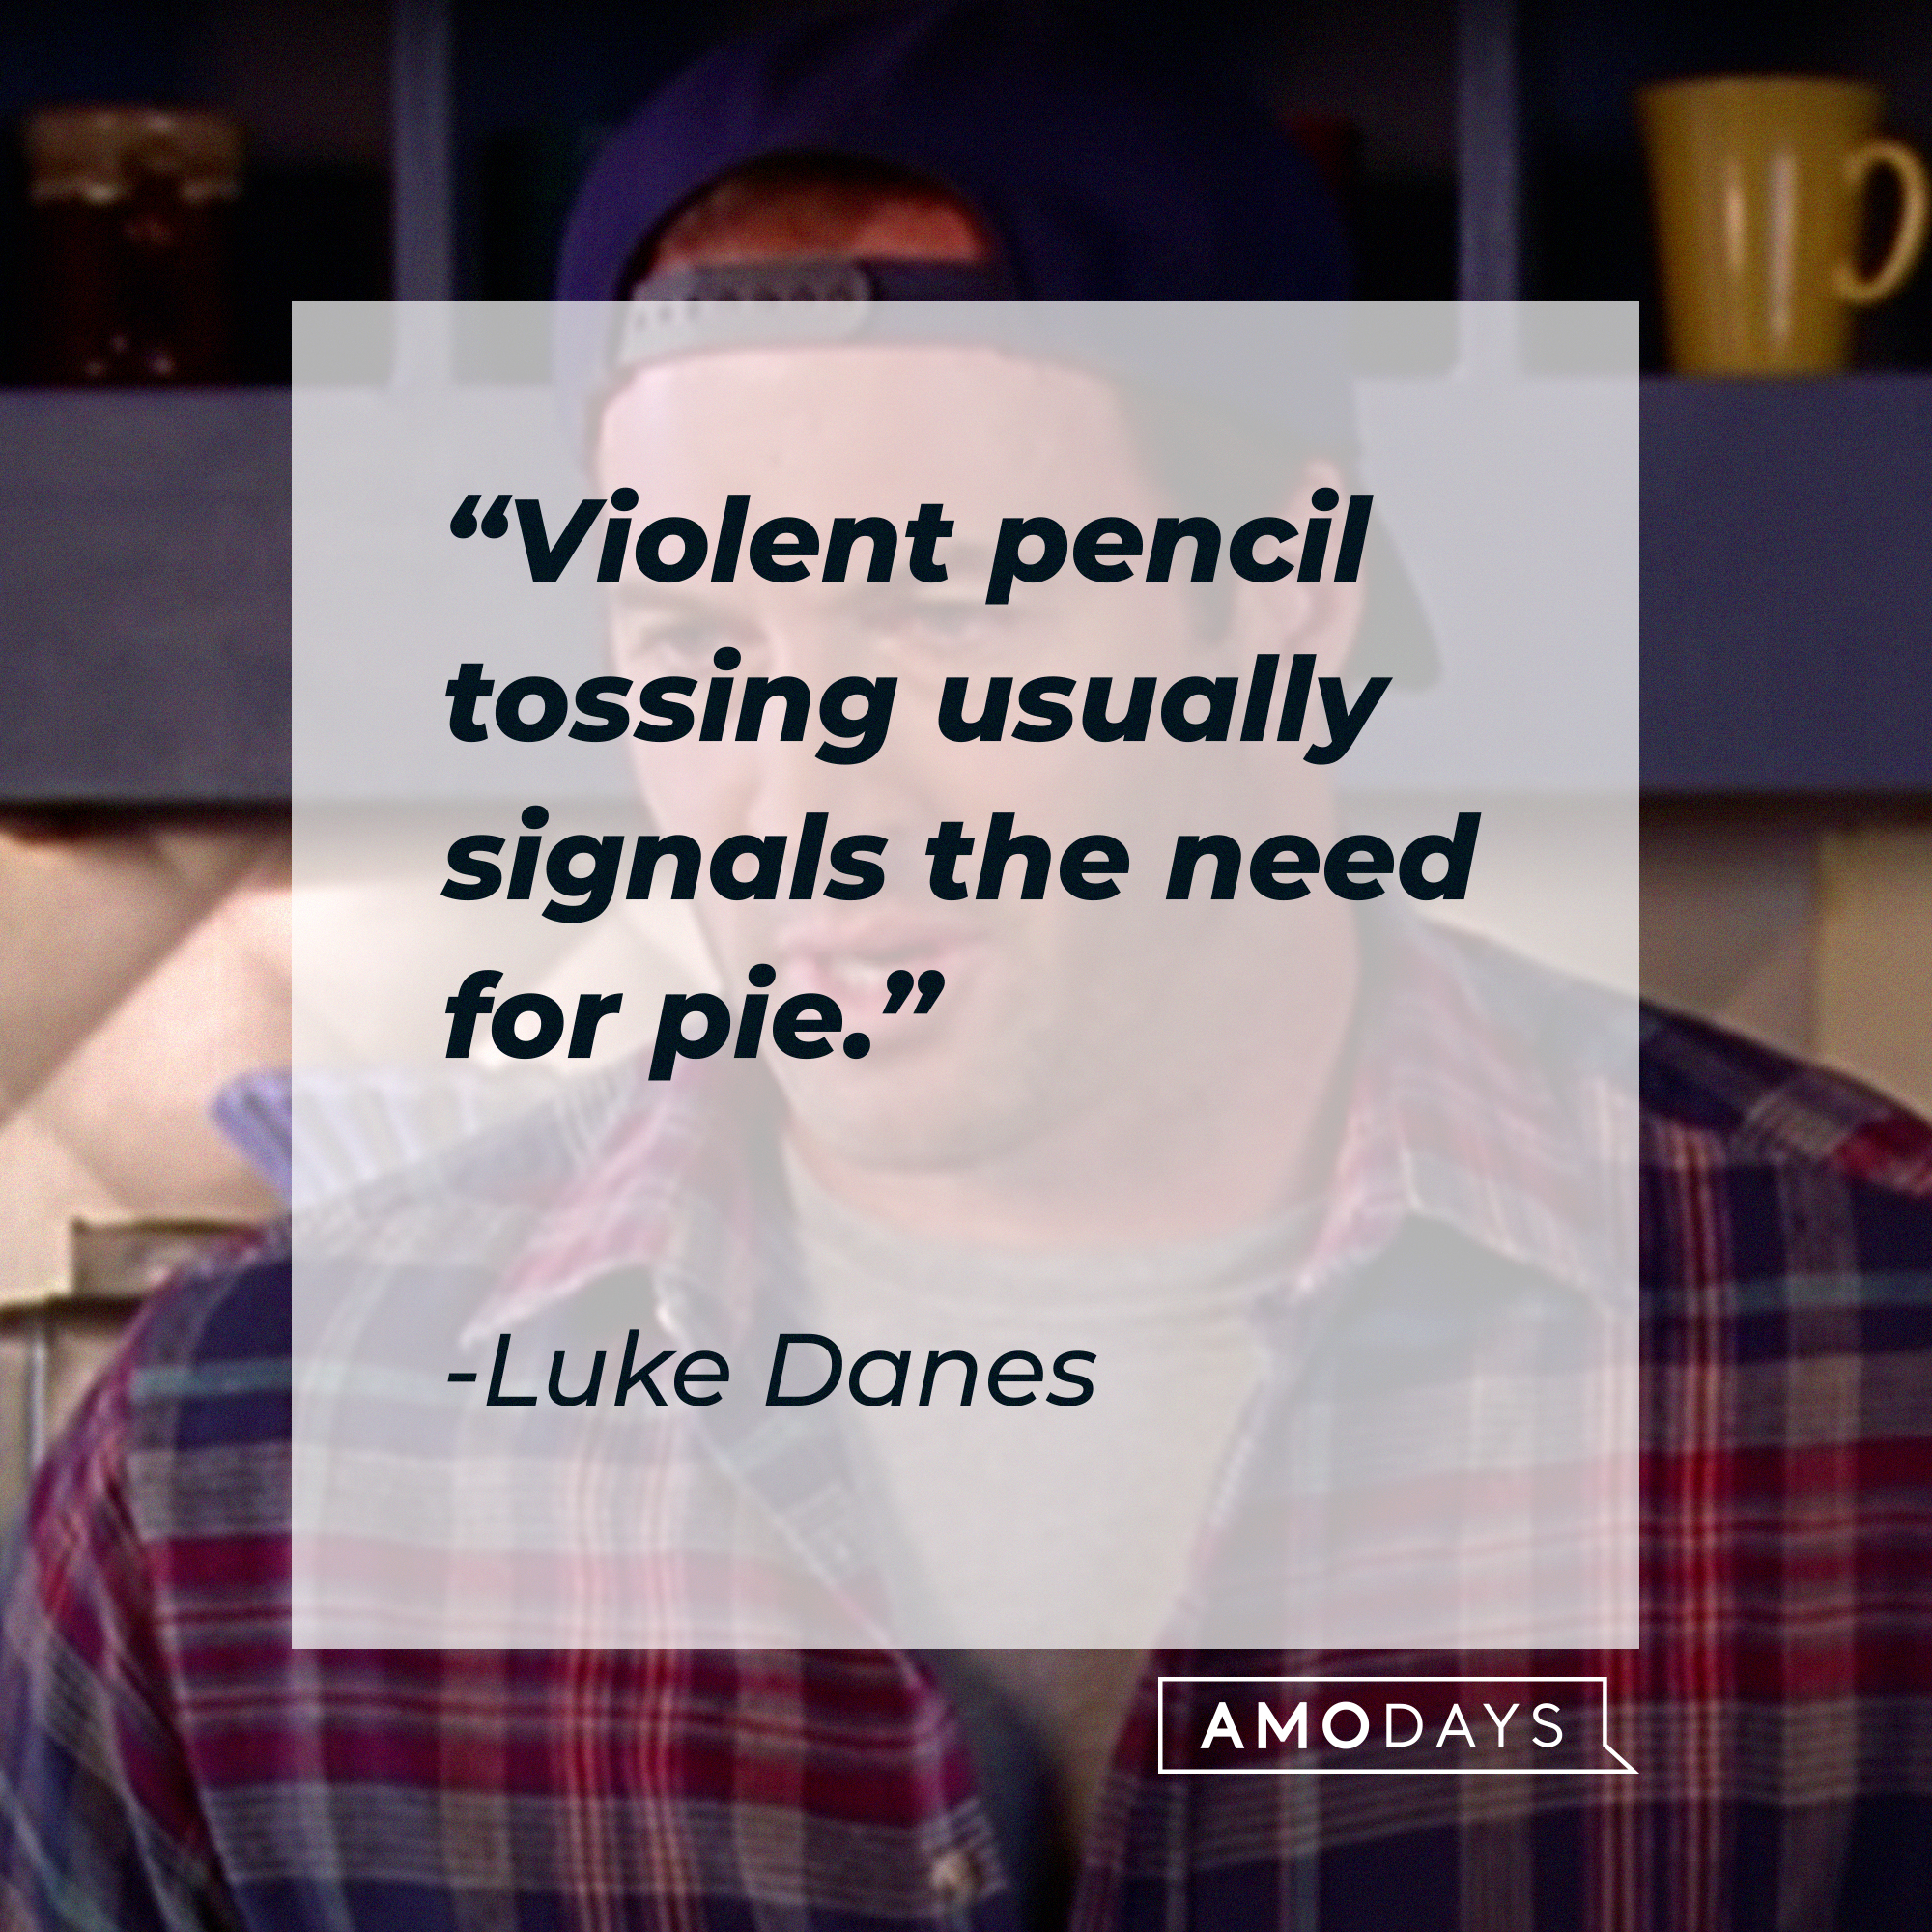 Luke Danes, with his quote: “Violent pencil tossing usually signals the need for pie.” |Source: facebook.com/GilmoreGirls